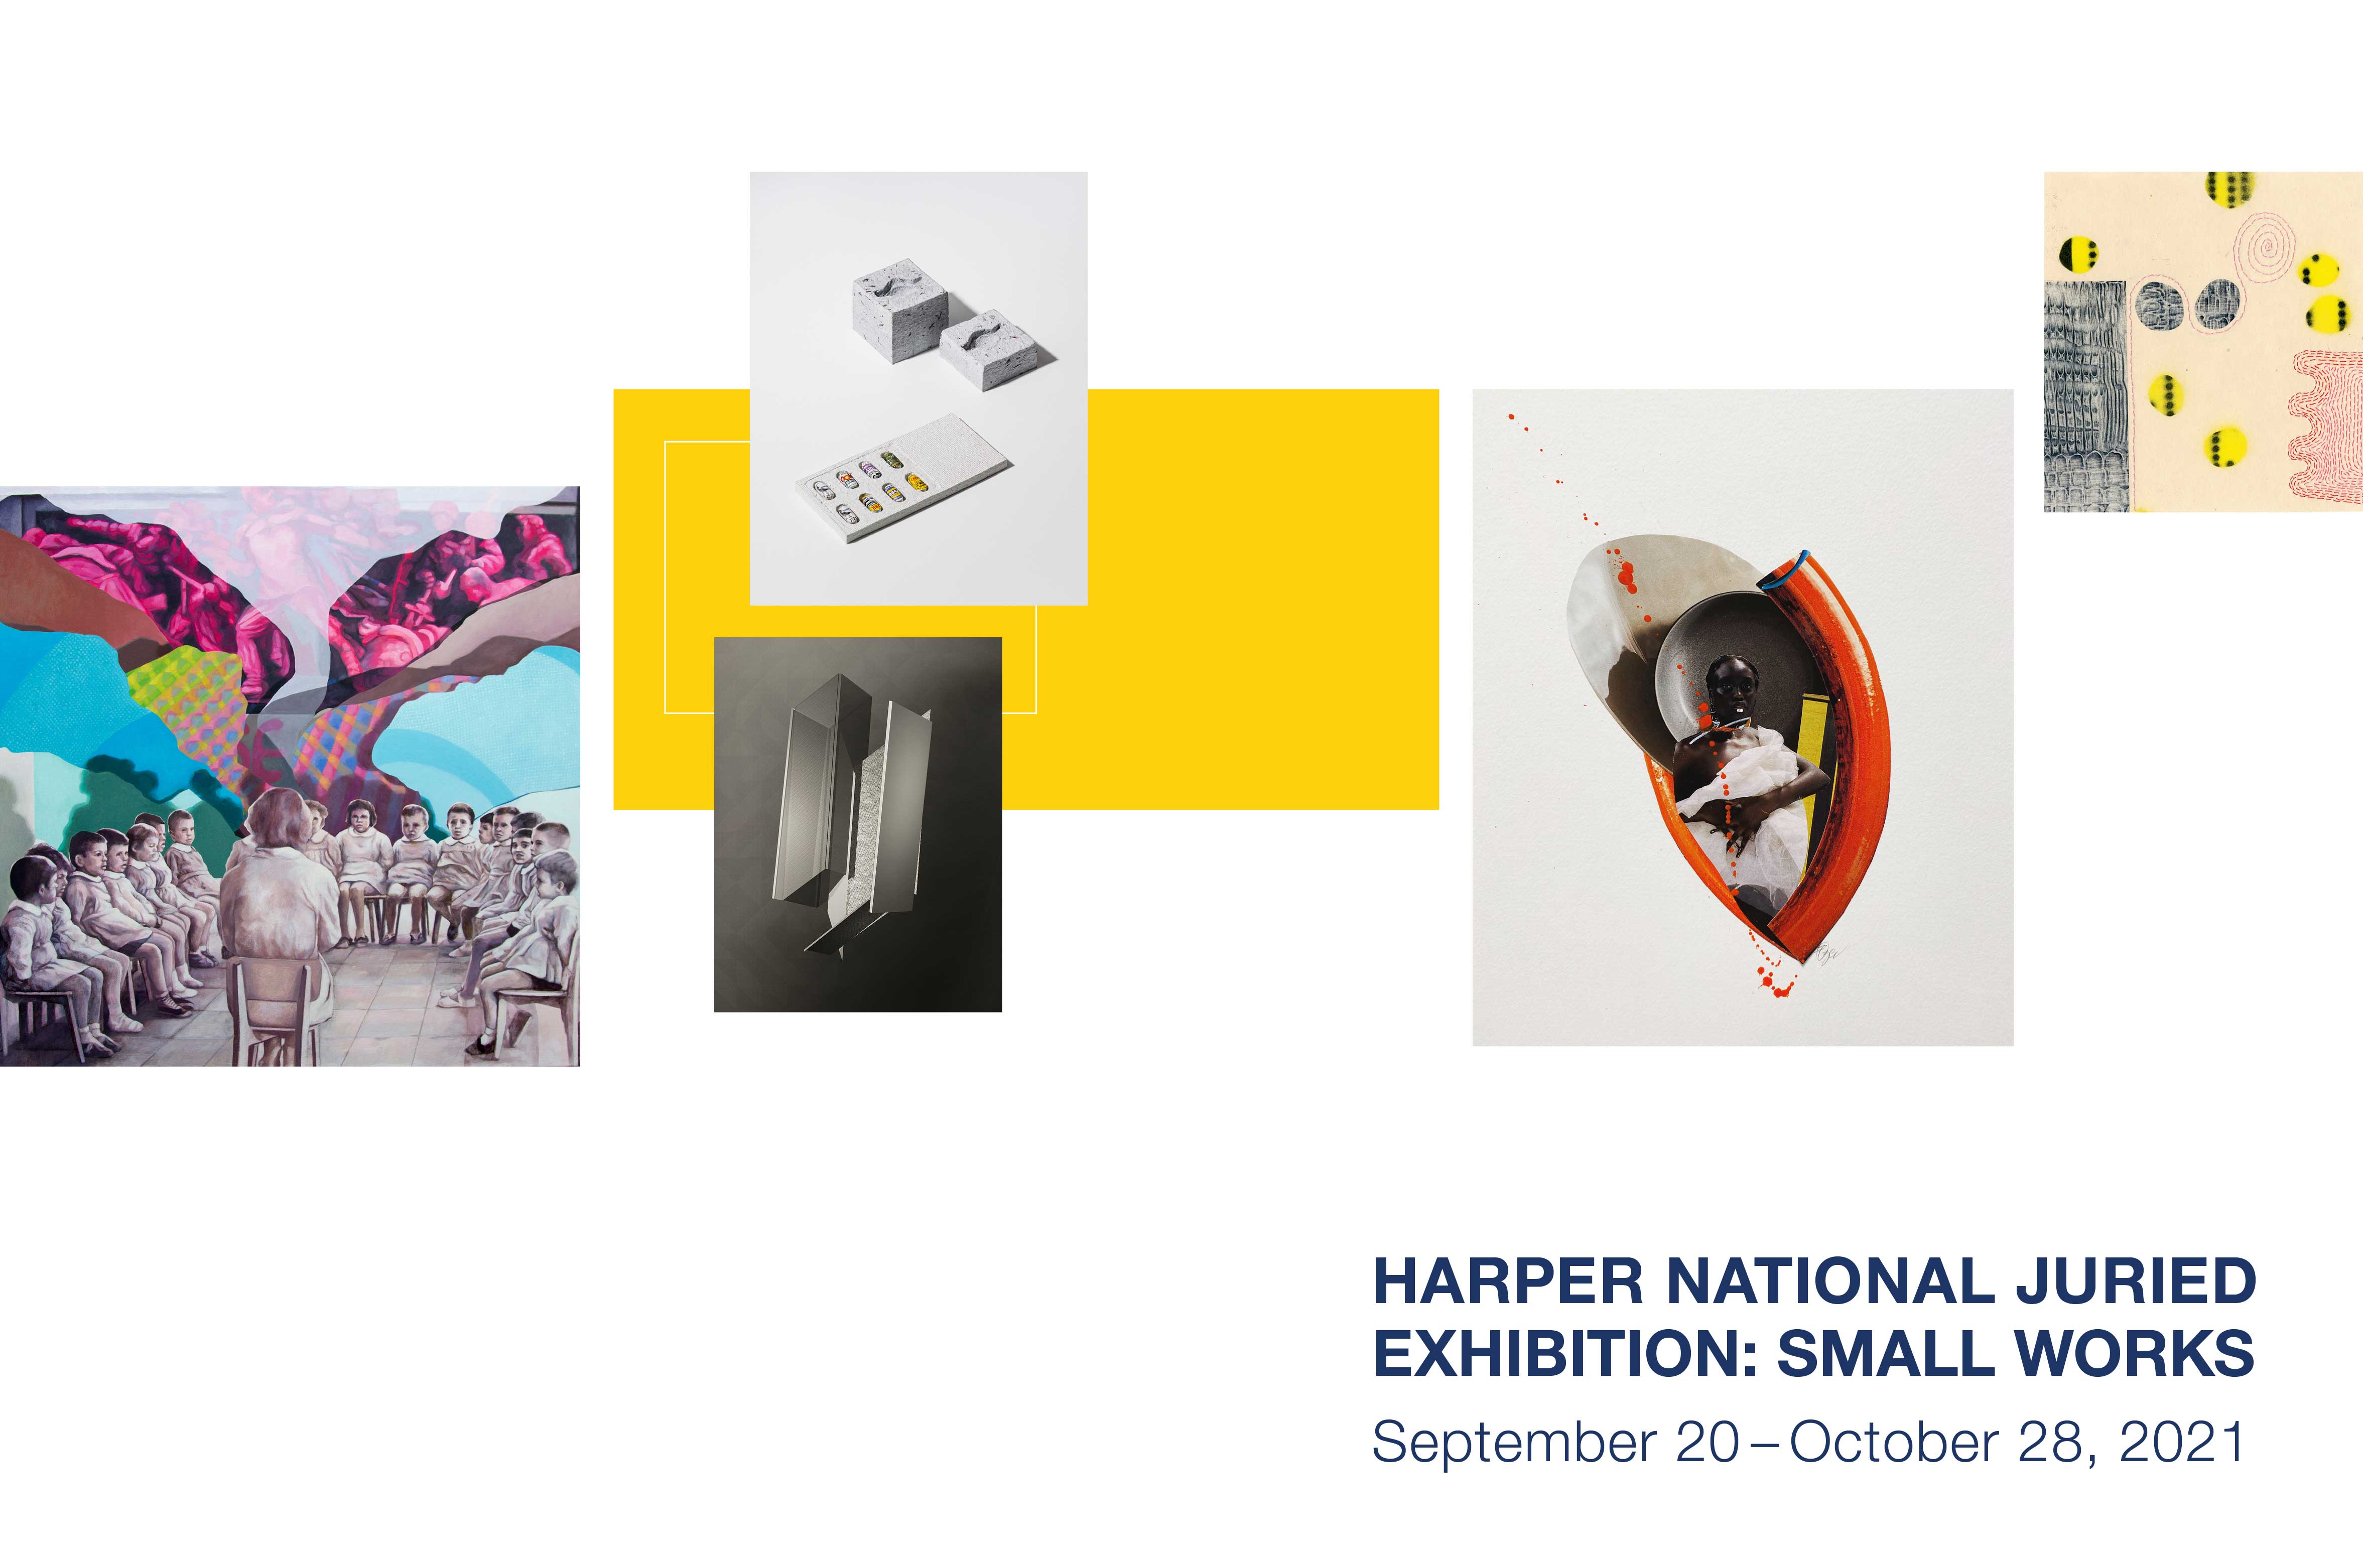 Thumbnail images of works in the exhibition with text 'Harper National Juried Exhibition: Small Works, September 20 - October 28, 2021'